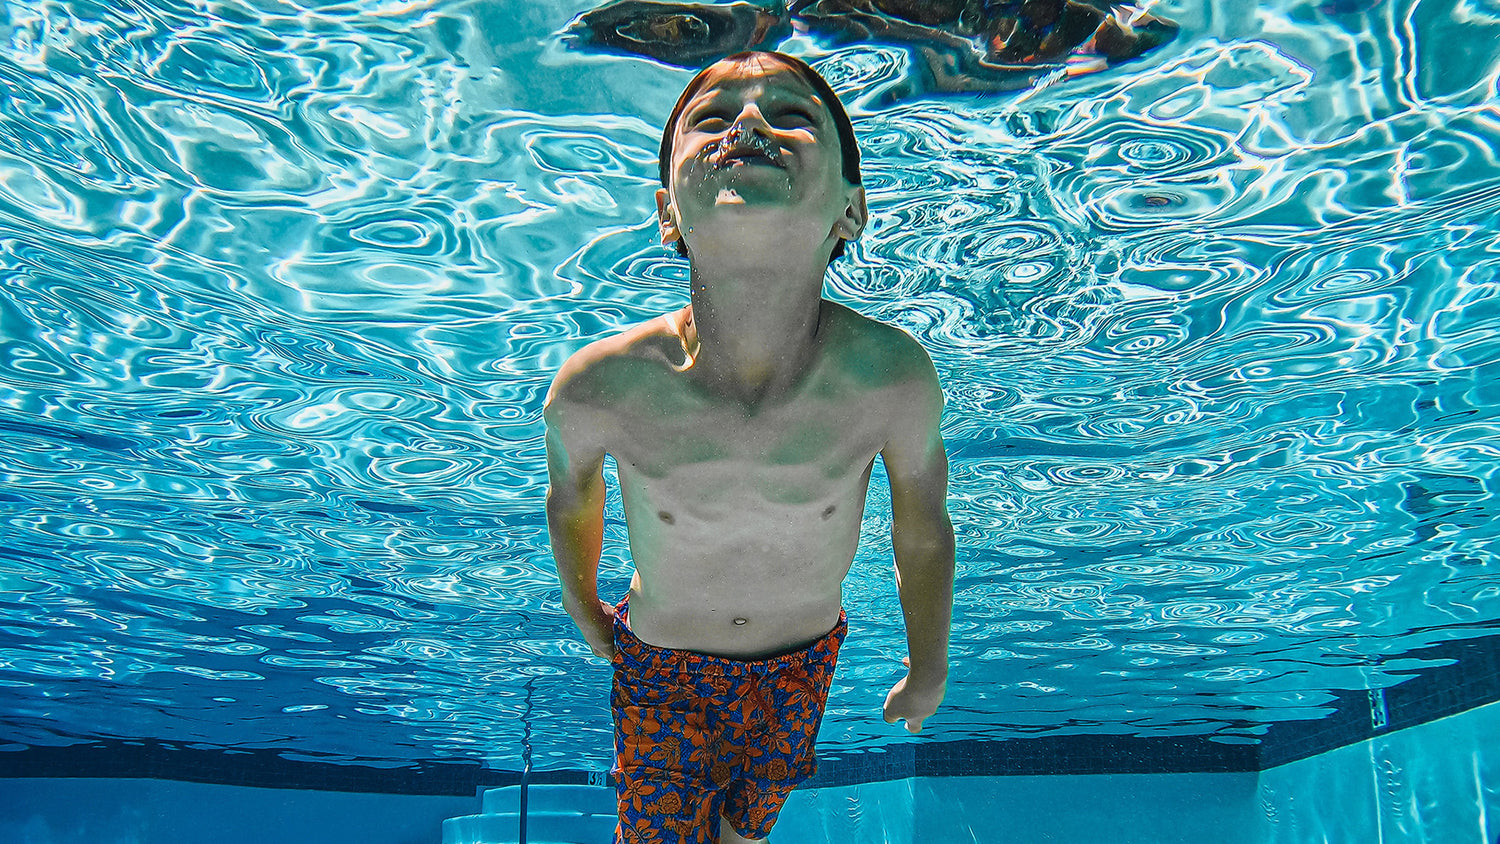 child swimming underwater in swimming pool. Child has eyes open and blowing air bubbles from nose. 